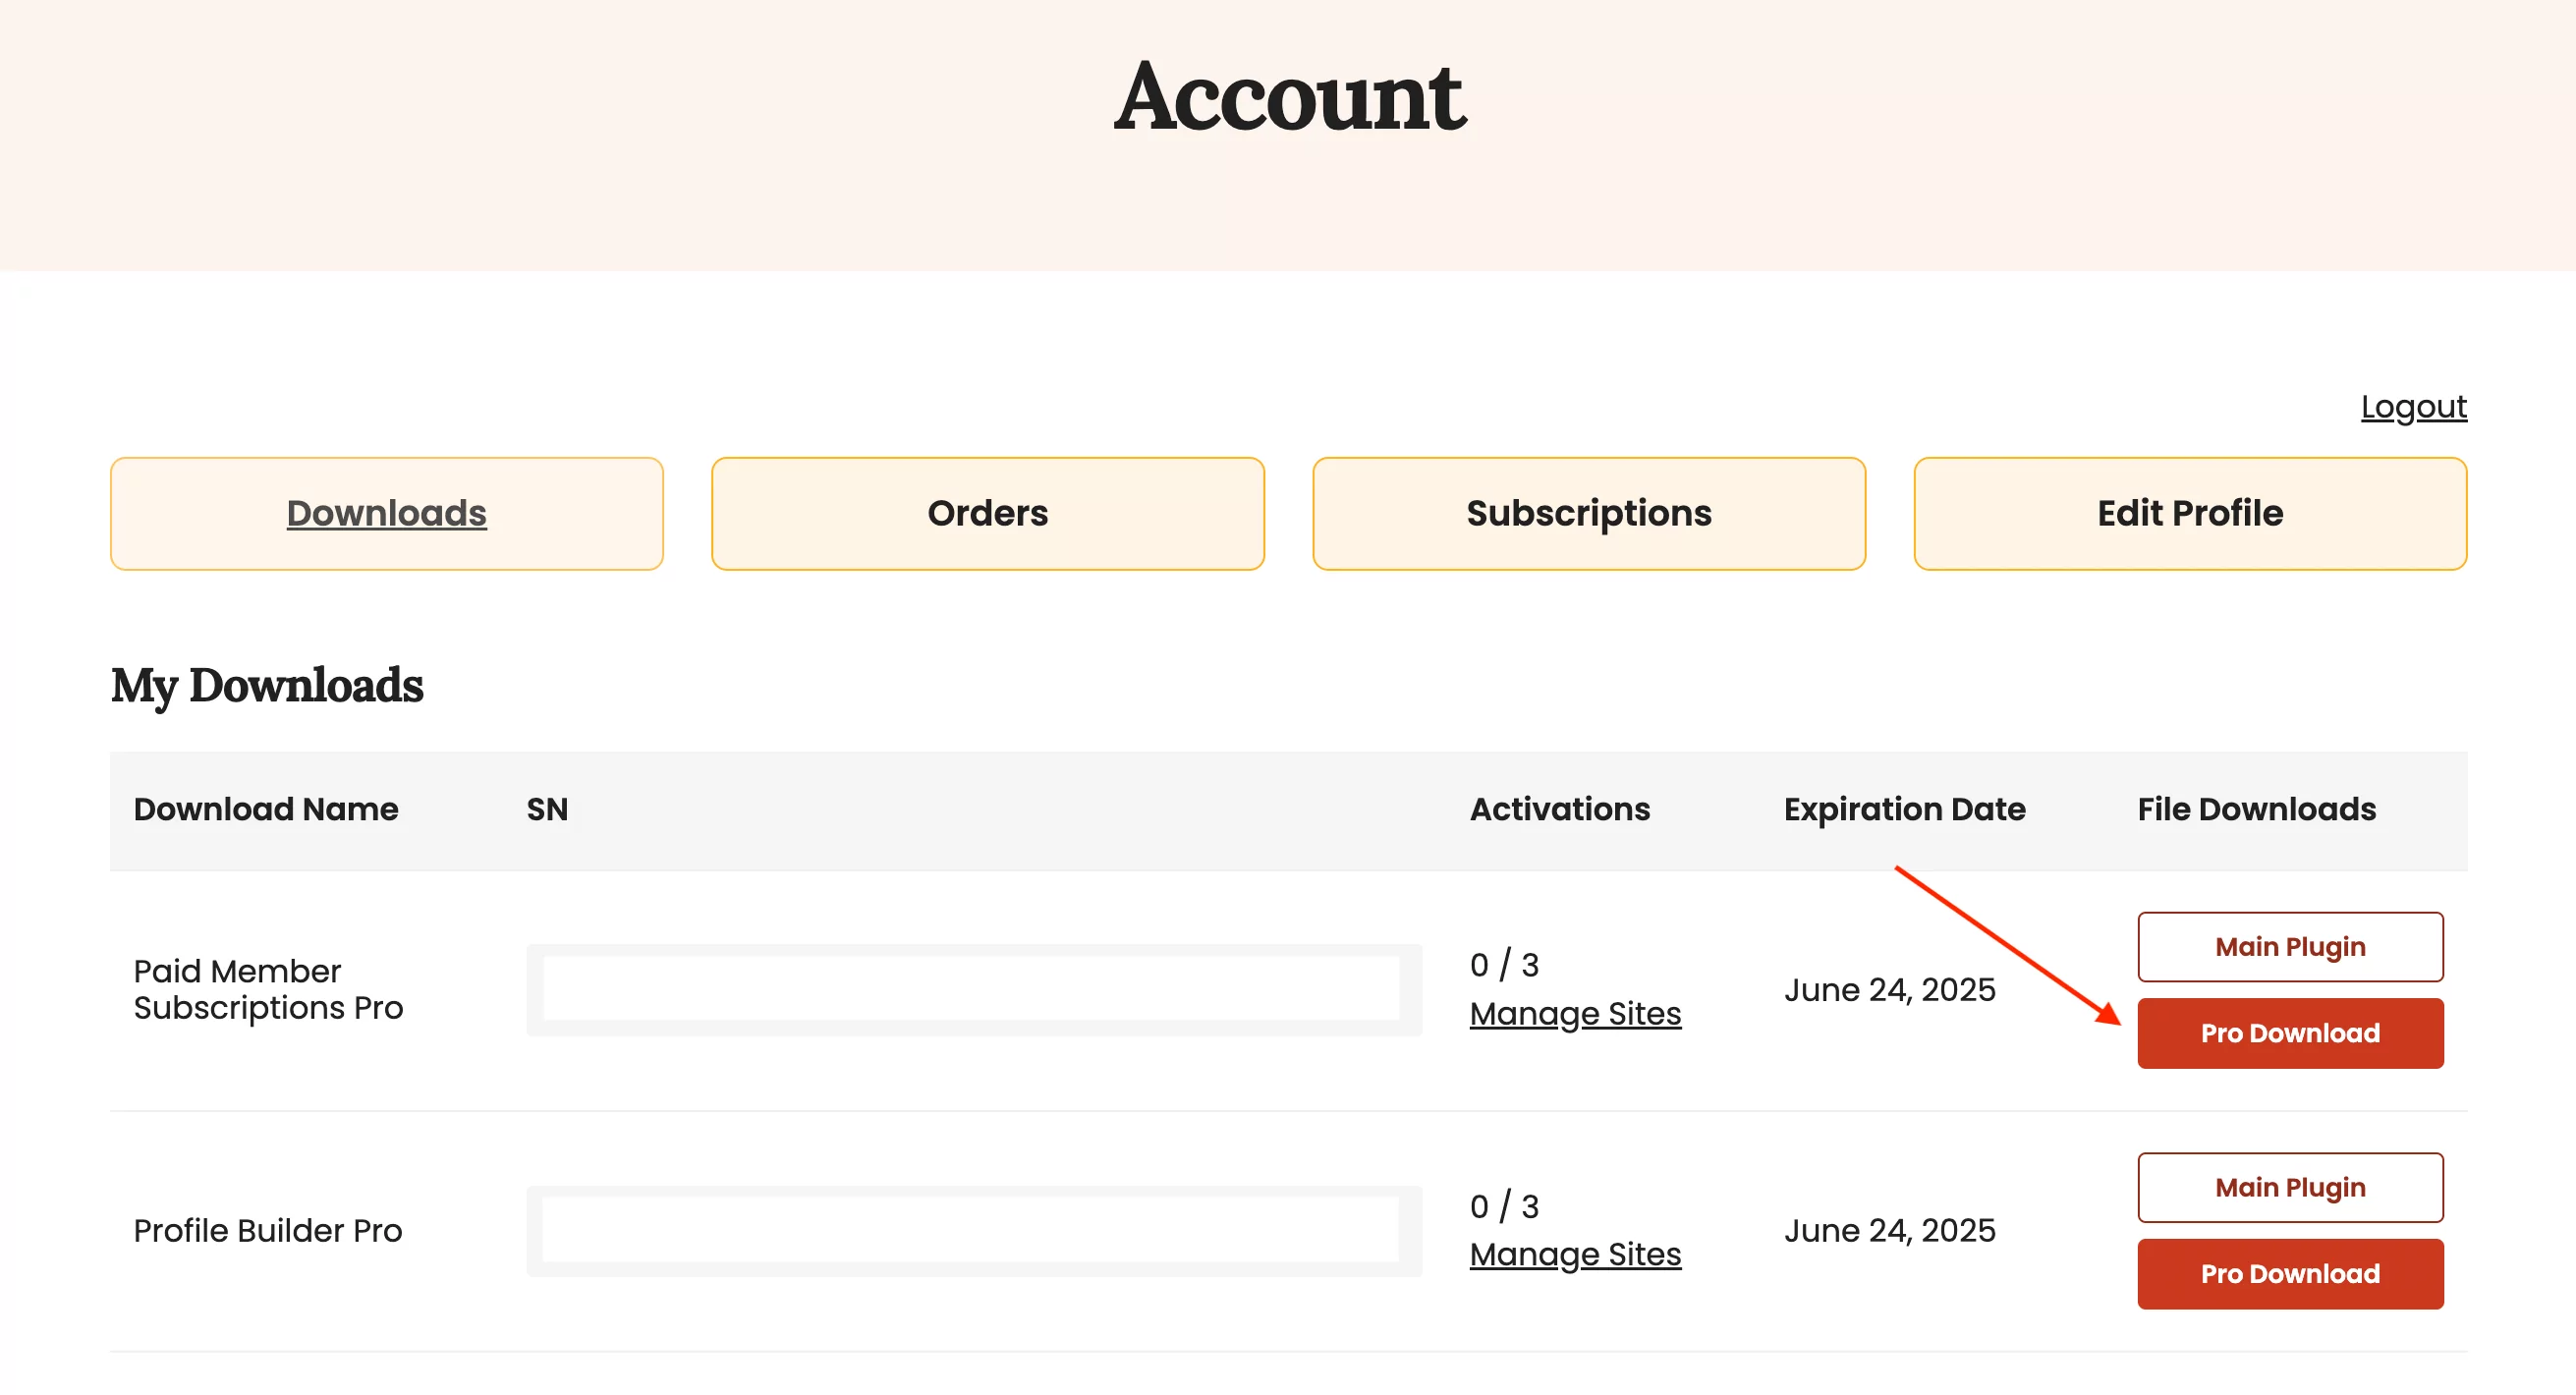 Downloading the file for the pro version of the Paid Member Subcriptions plugin